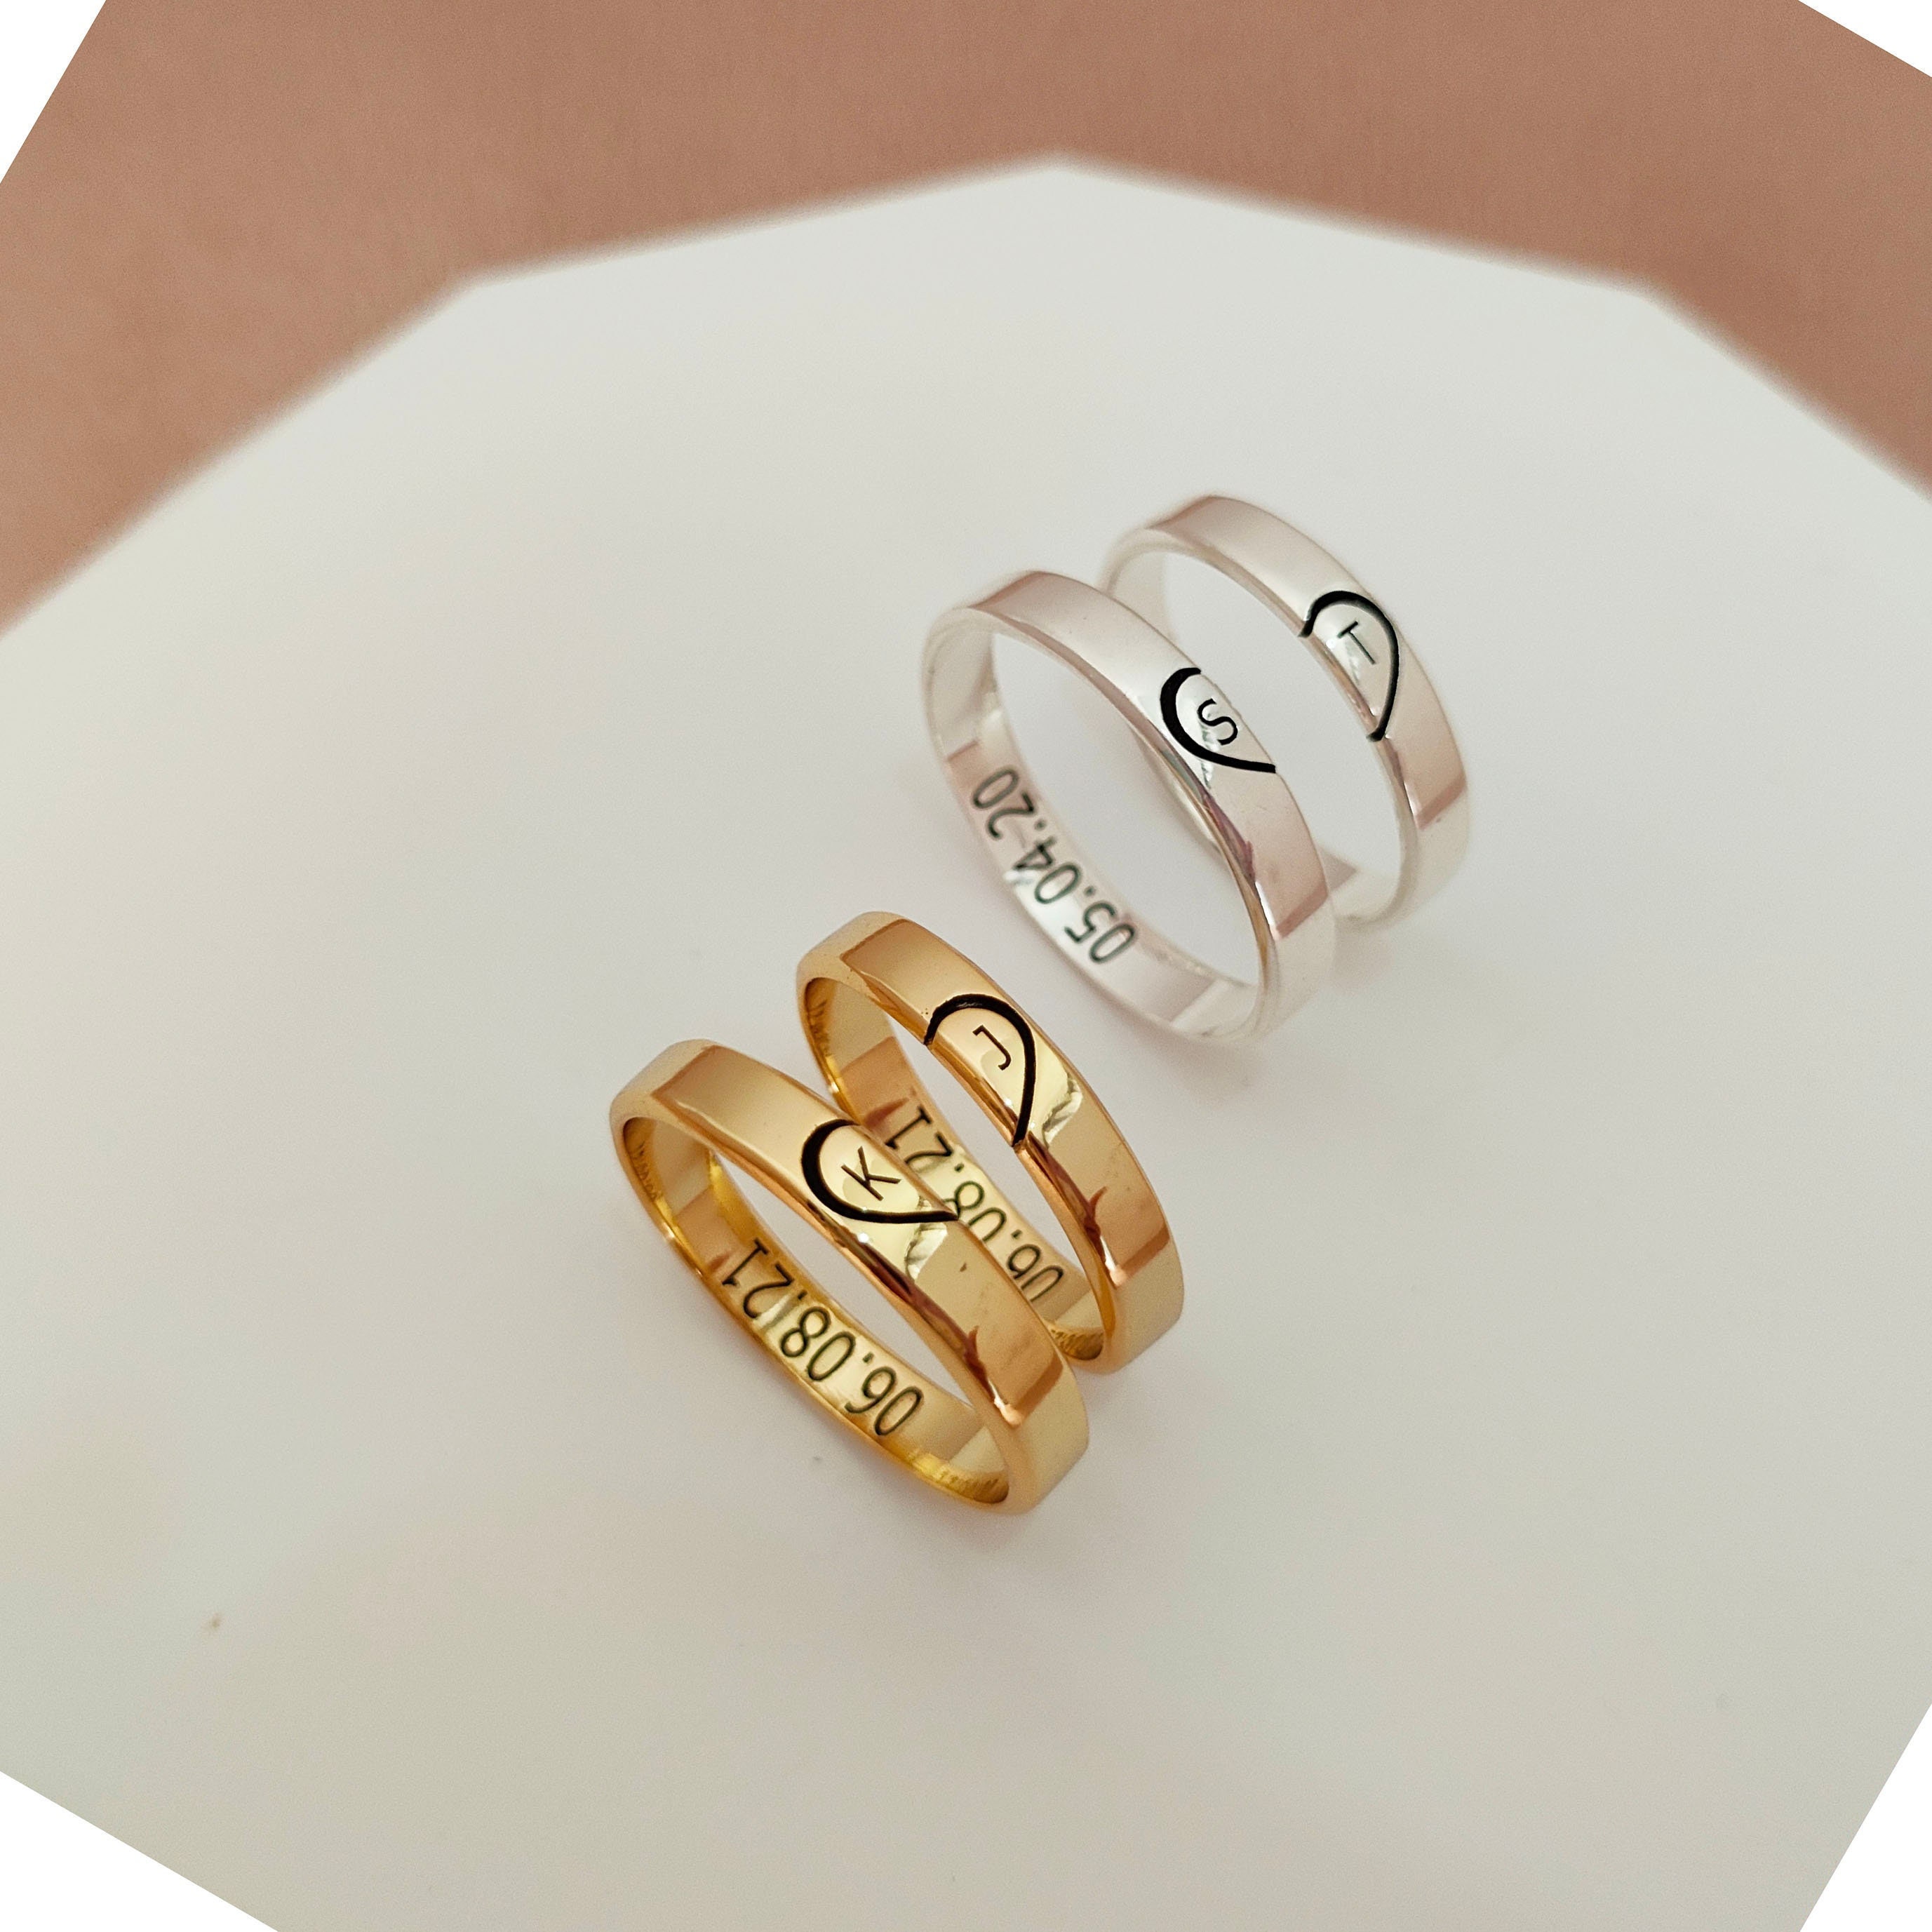 How to personalize couple rings? #customized #personalized #couplelove # engraved #engravedgifts #memories #memory #loveforever #lovegift... |  Instagram